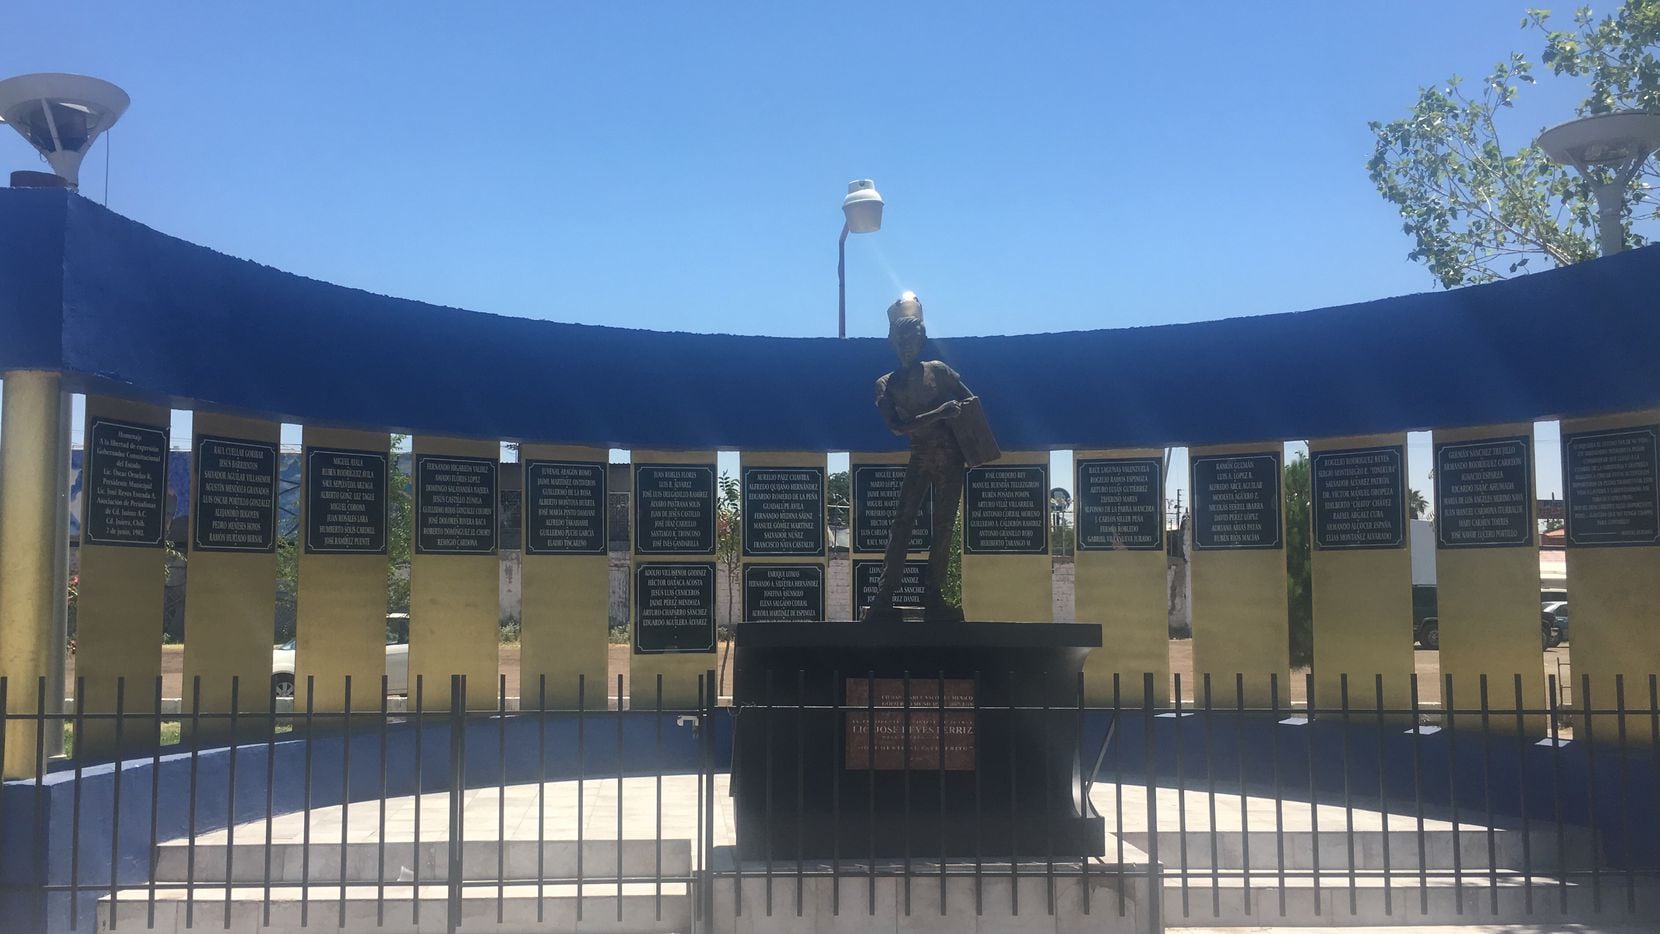 The Plaza del Periodista monument in Ciudad Juarez pays tribute to journalists in the...